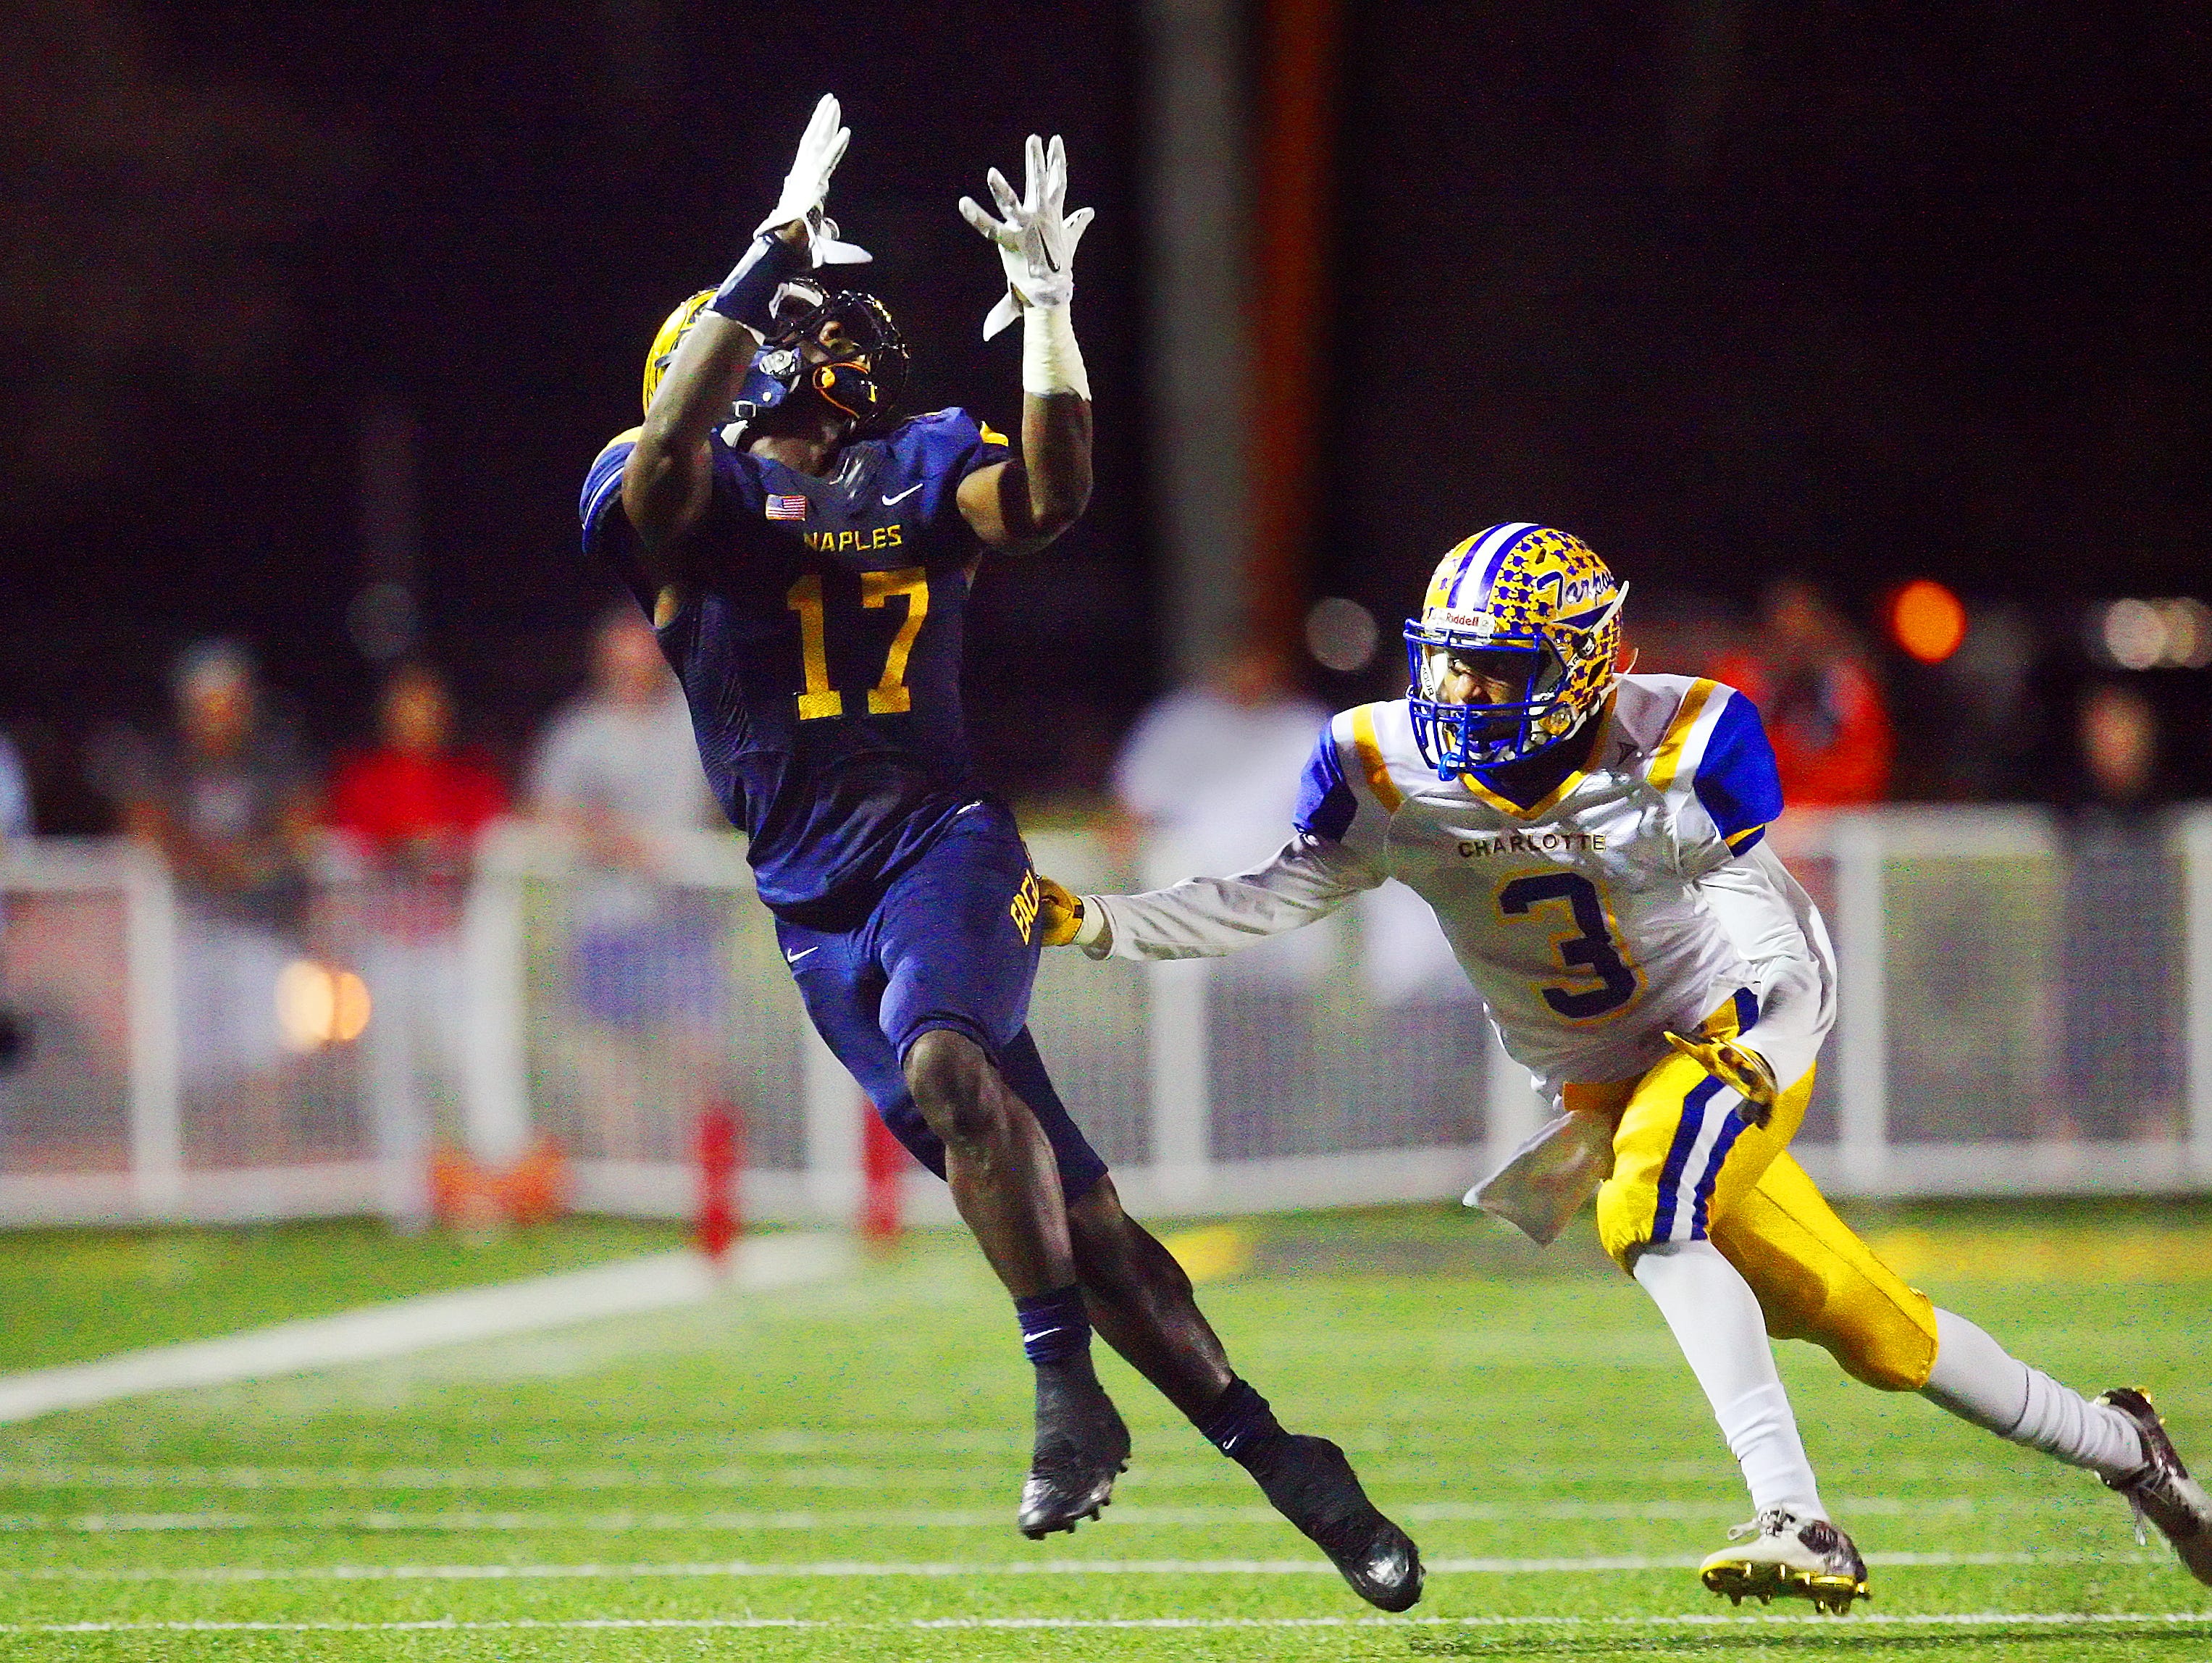 Naples High School's Tyler Byrd leaps for a pass against Charlotte during the Class 6A Region 3 final Friday at Naples High School. Naples beat Charlotte 35-0.